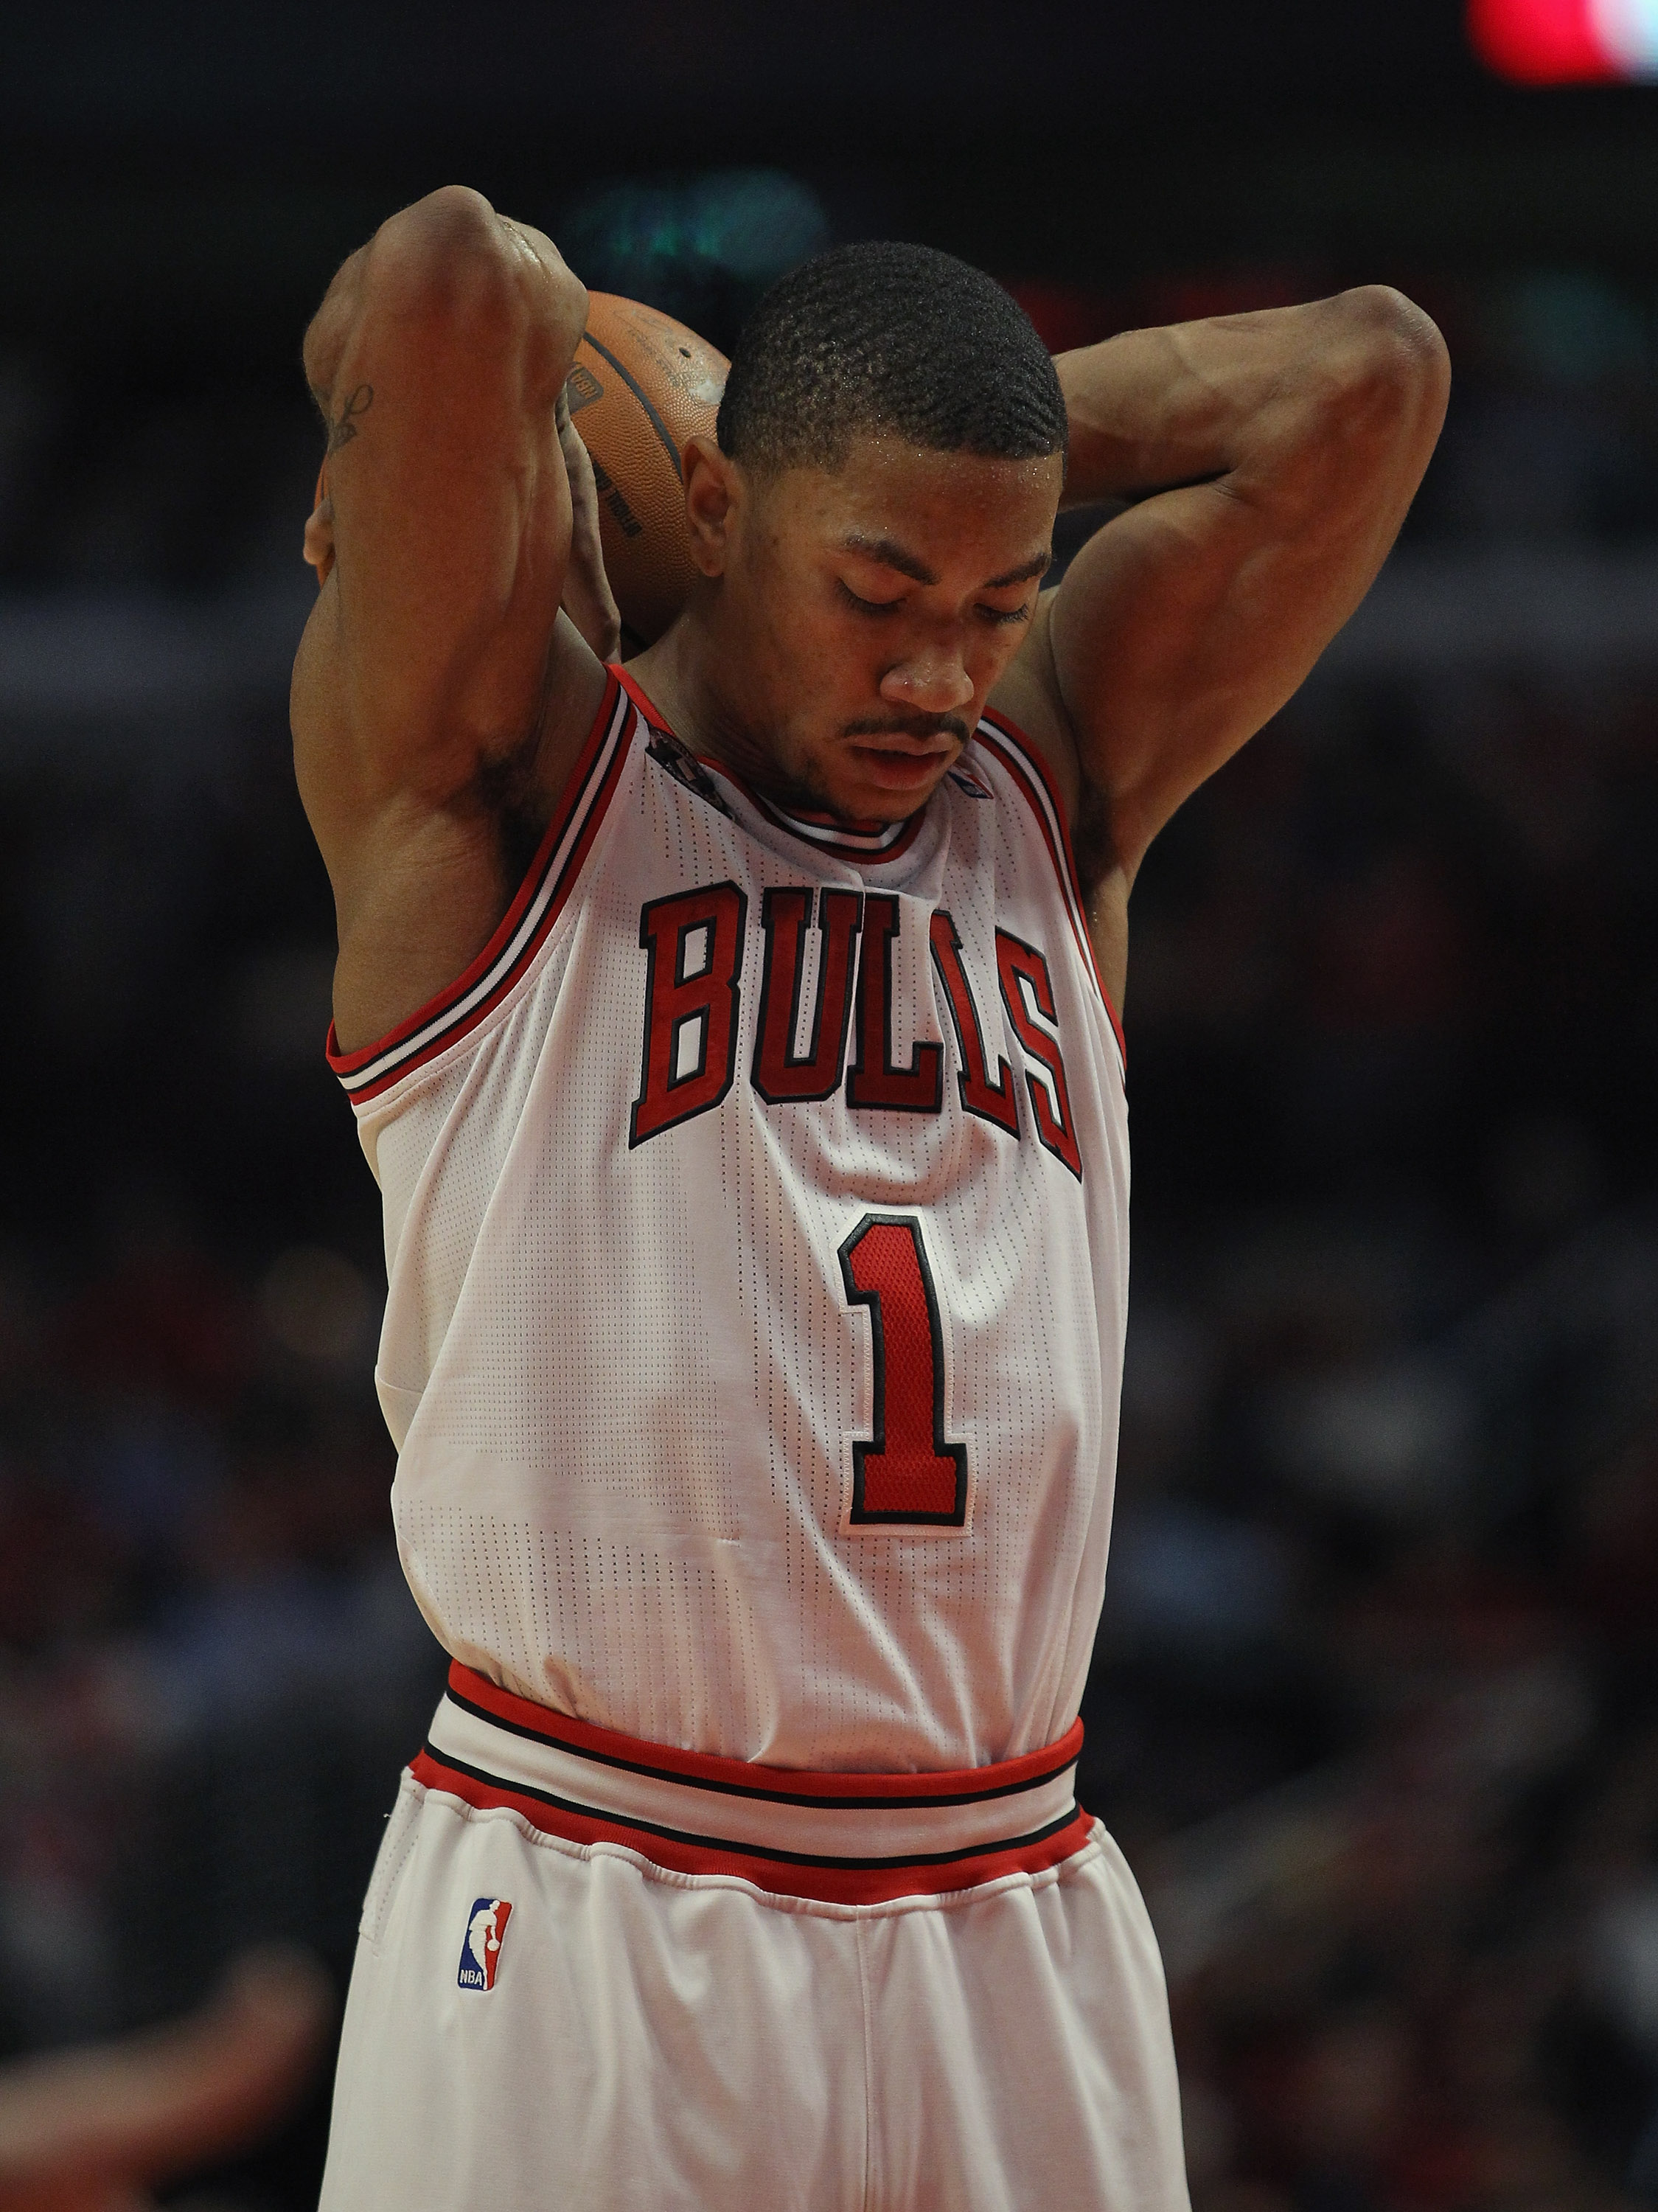 Does Derrick Rose still want to play in the NBA?